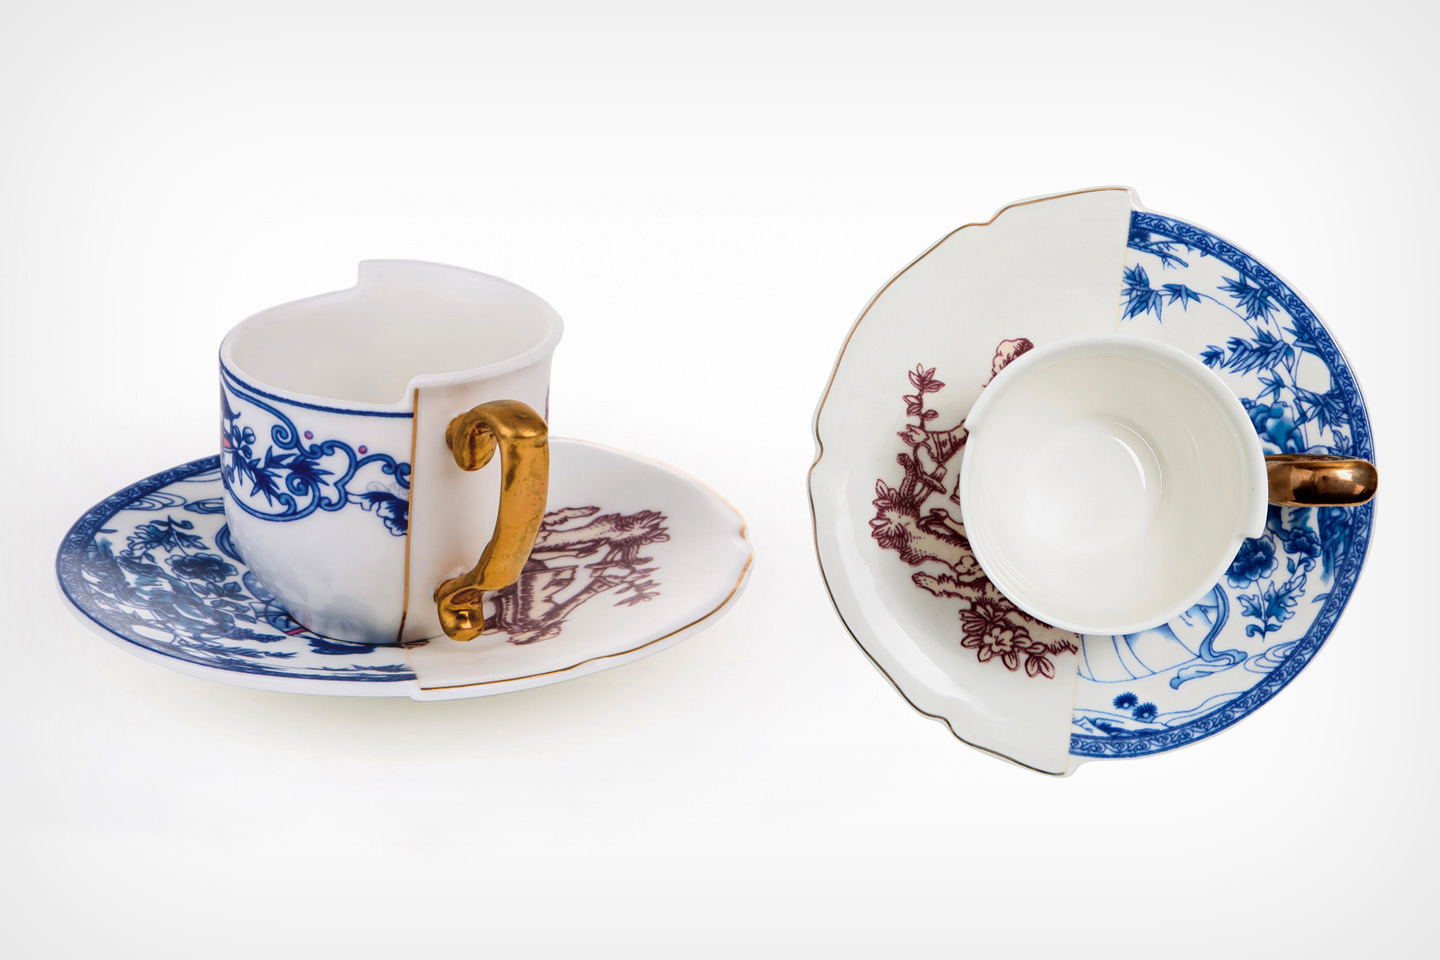 #This teacup’s split design celebrates the history of ceramic design in both the east and west